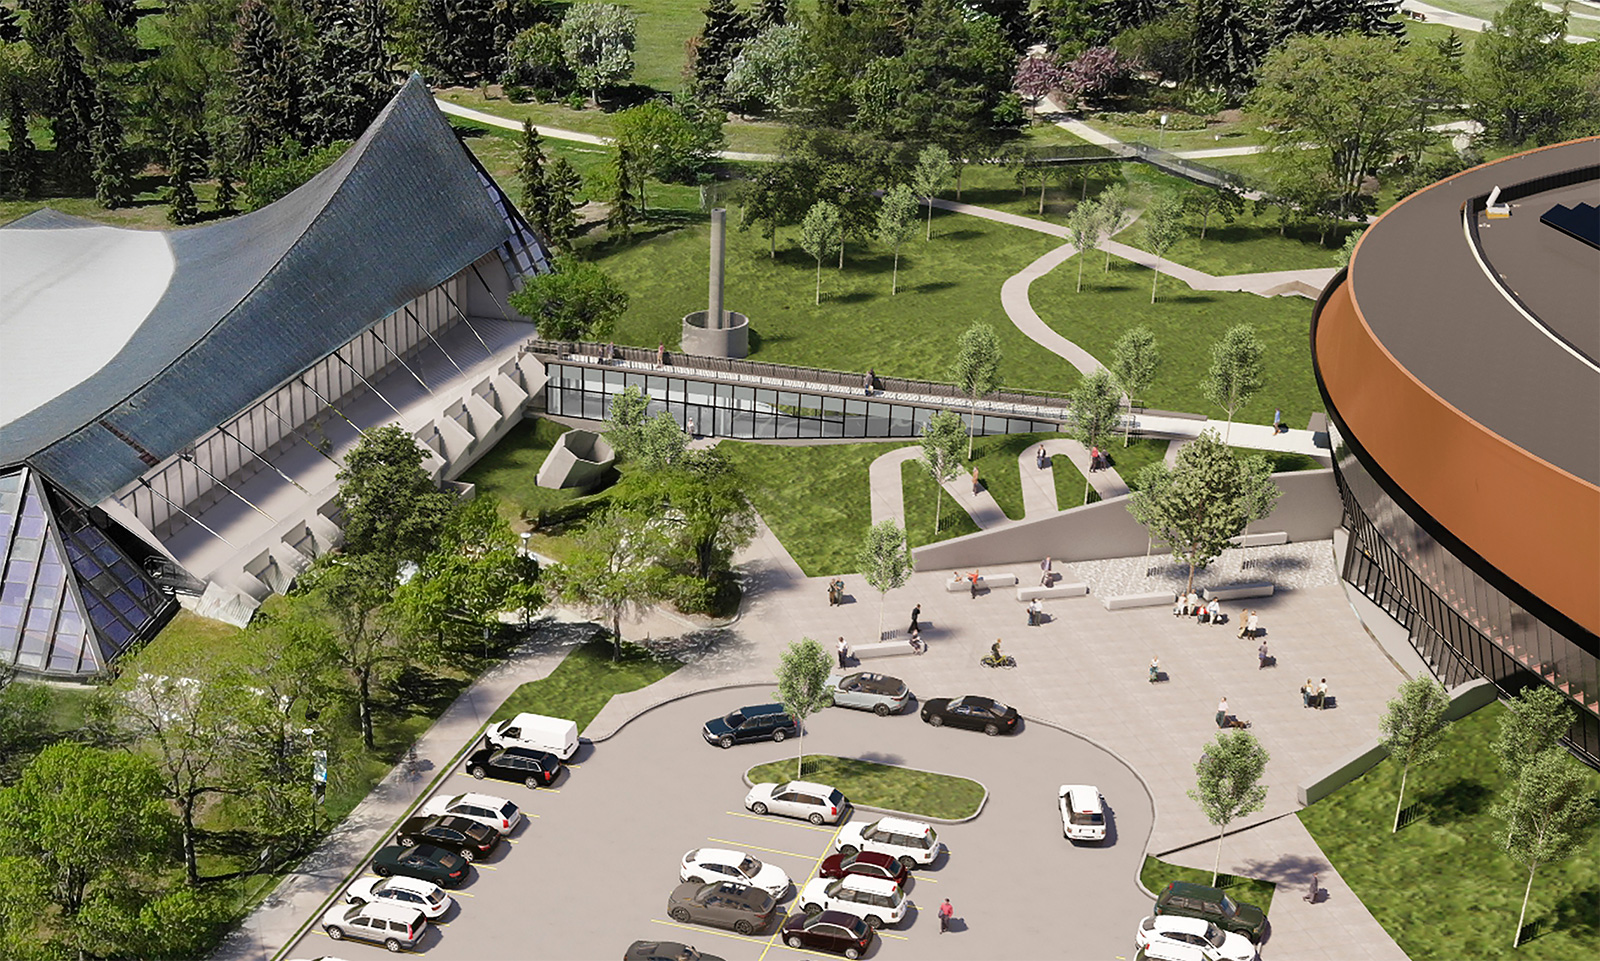 Artist rendering showing the link between the Coronation Recreation Centre and the Peter Hemingway Leisure Centre, main entrance and park path connections. 